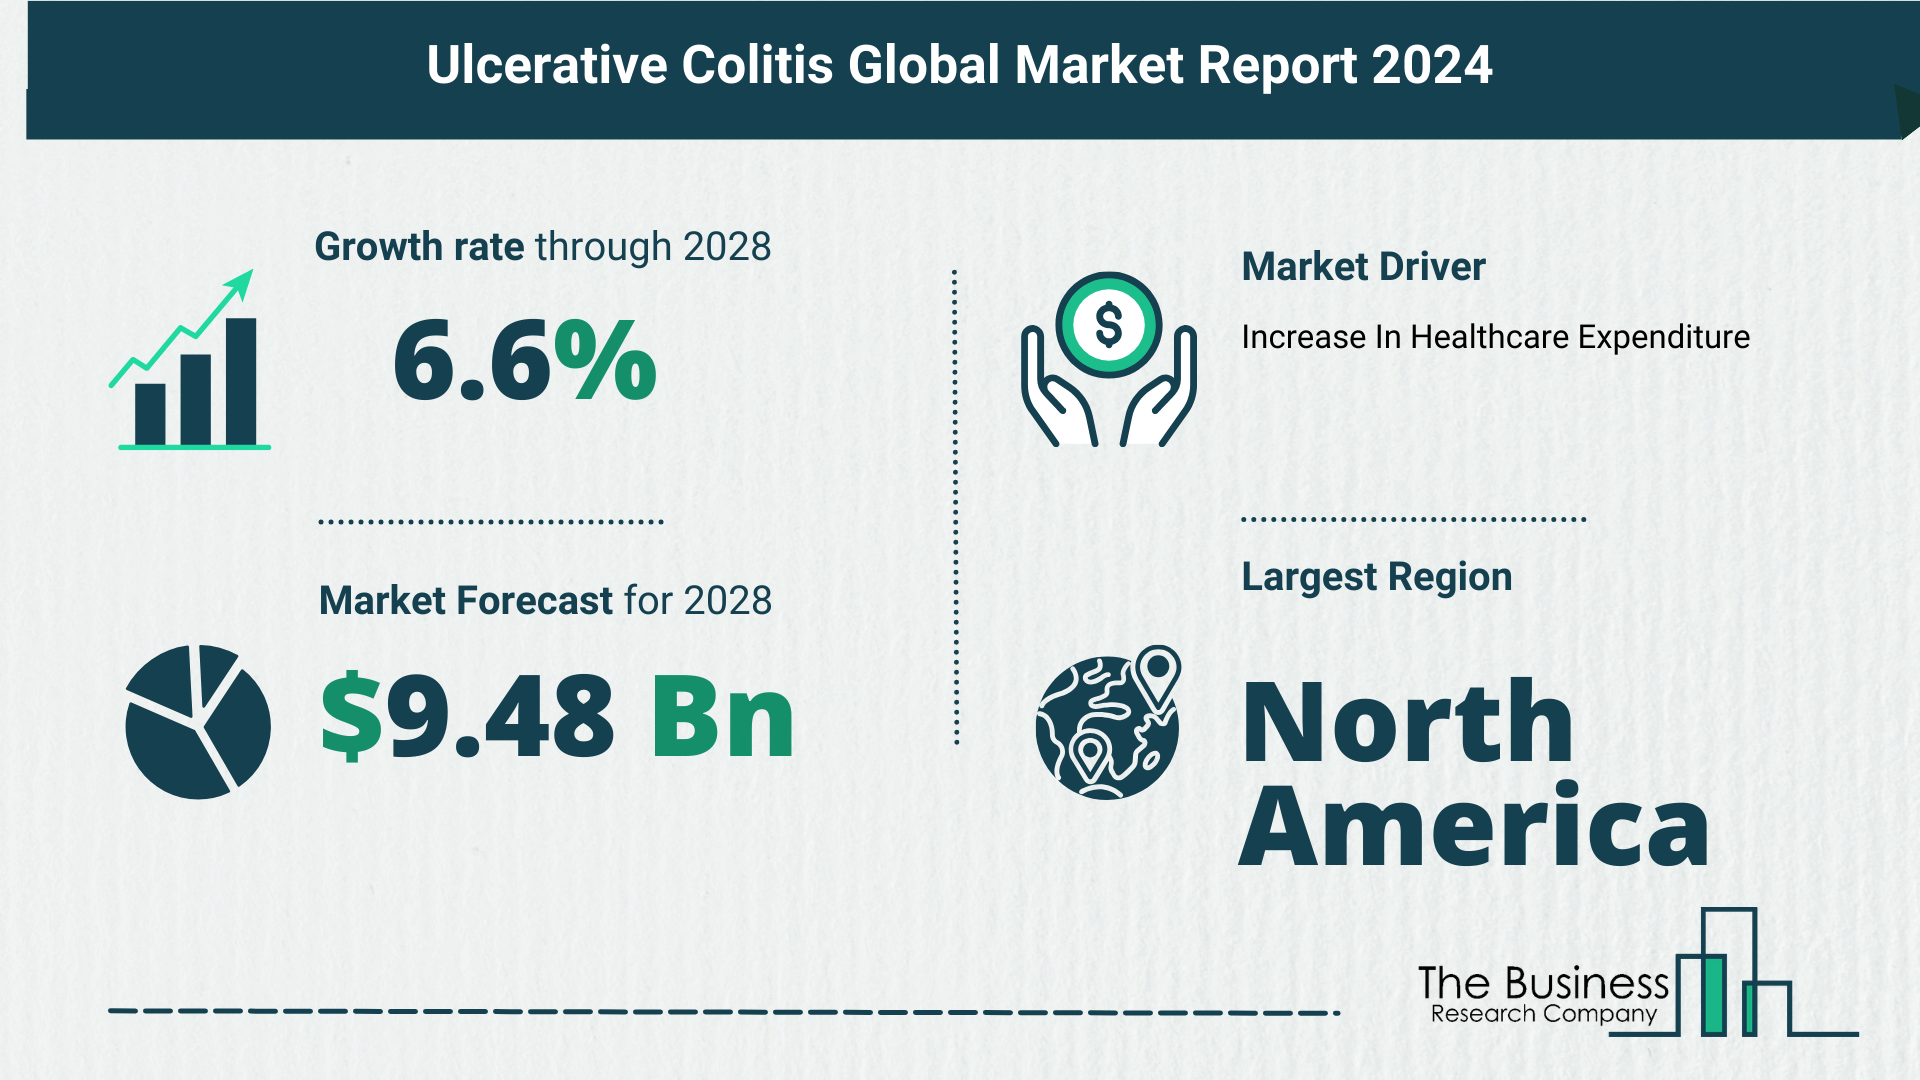 Key Takeaways From The Global Ulcerative Colitis Market Forecast 2024